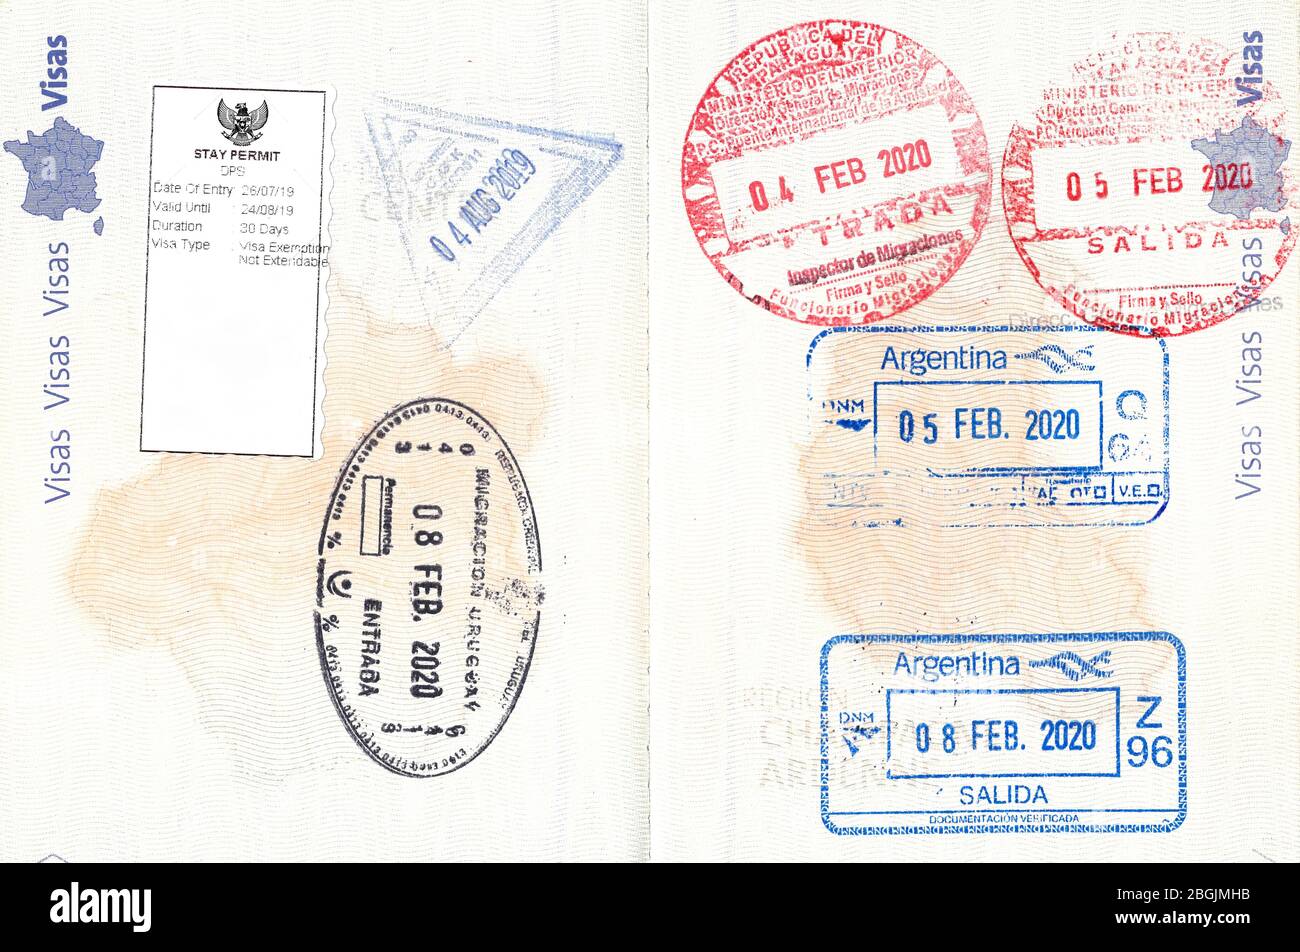 Stamps of Indonesia, Uruguay, Paraguay and Argentina in French passport Stock Photo